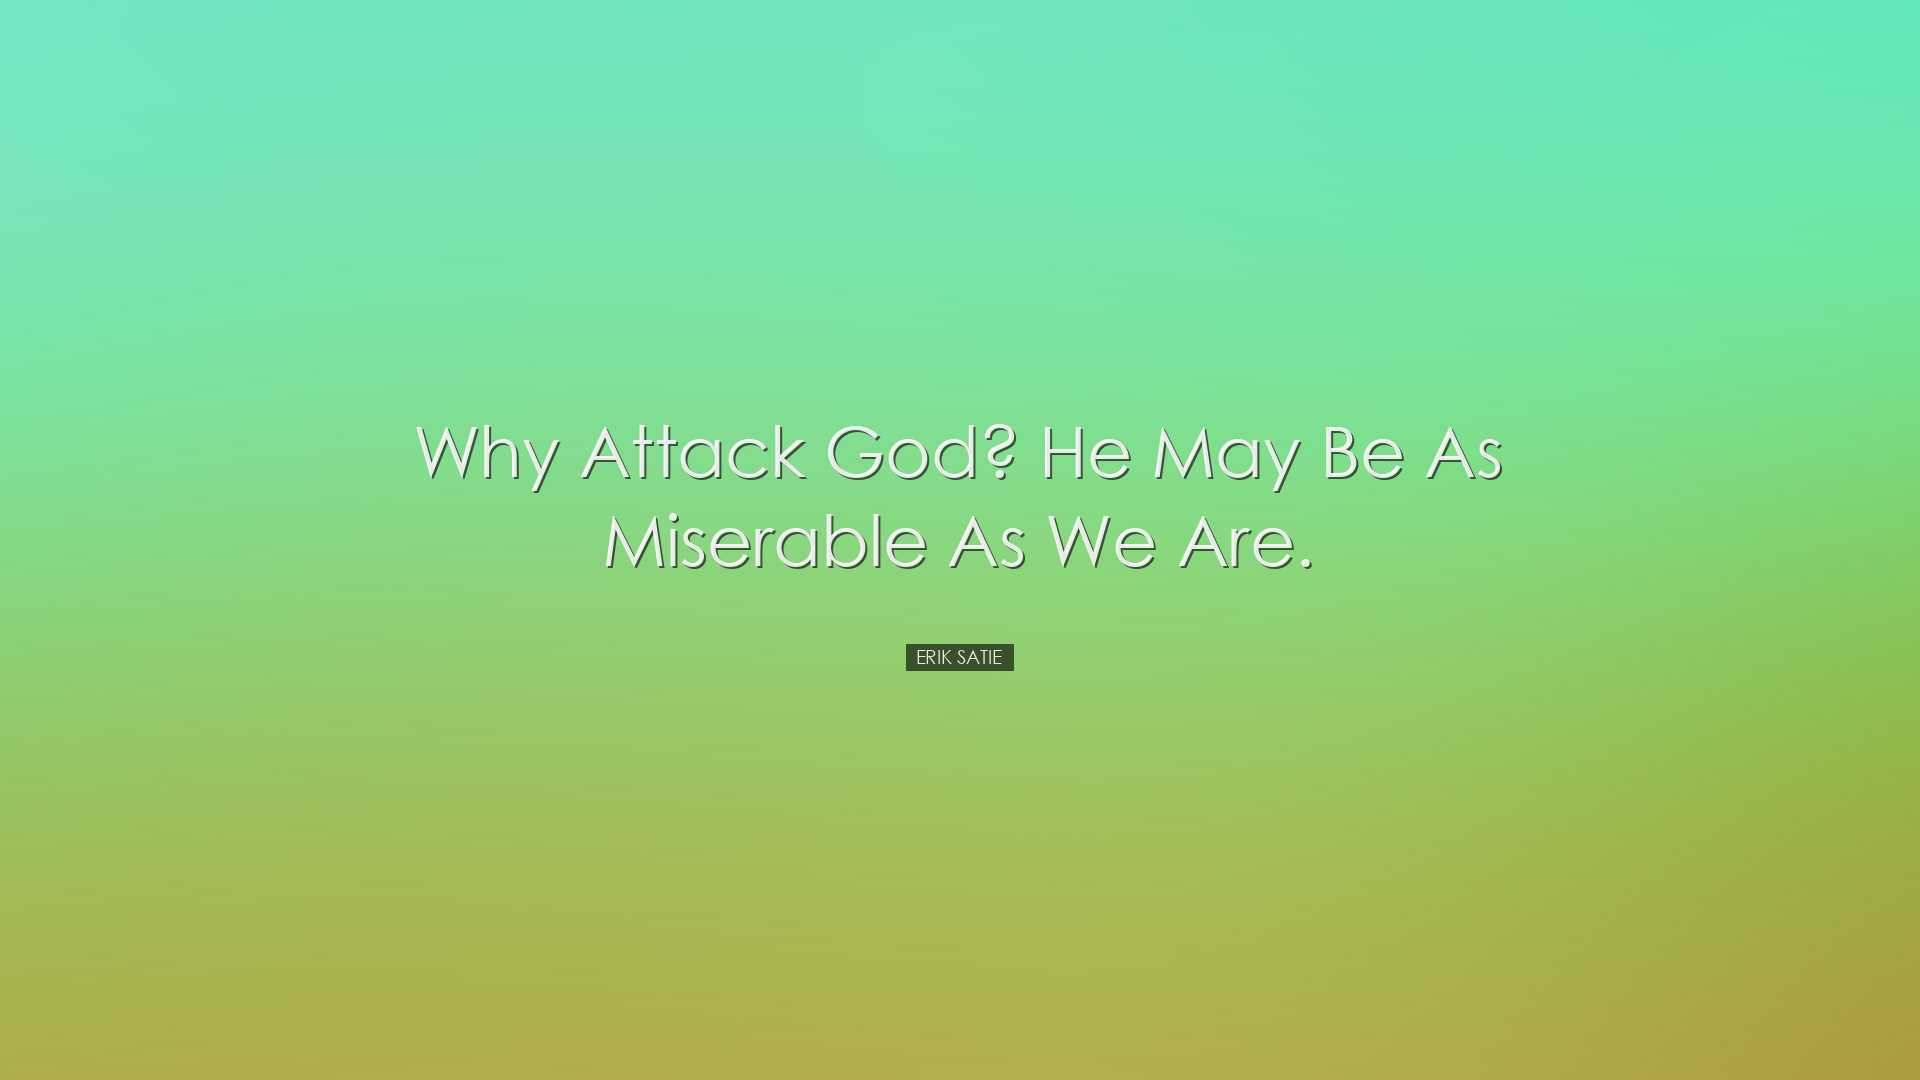 Why attack God? He may be as miserable as we are. - Erik Satie